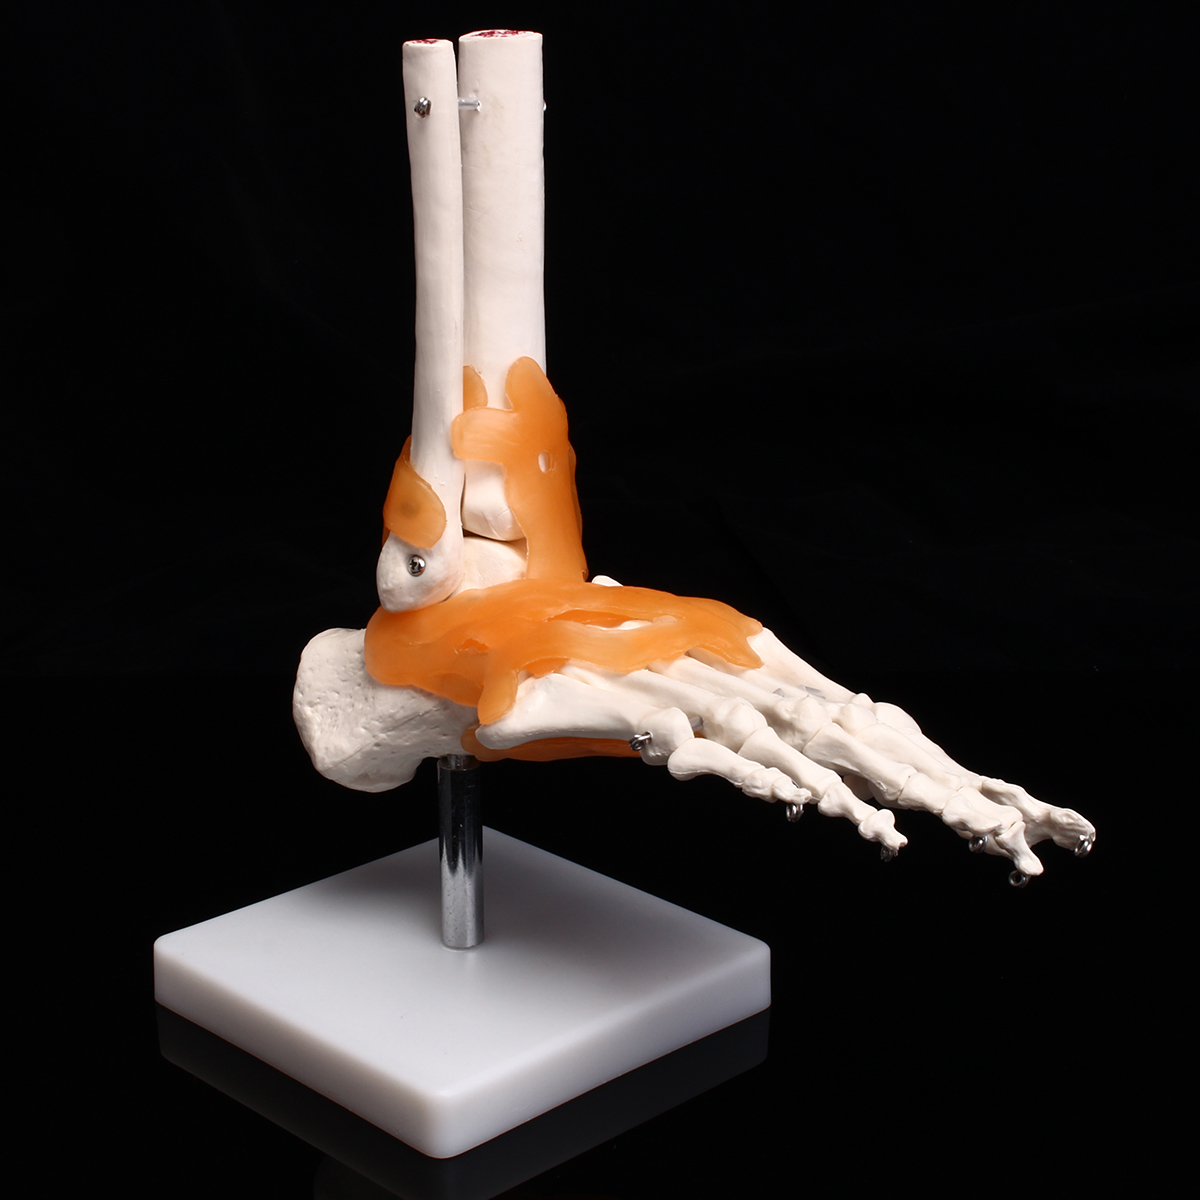 

Life Size Foot Ankle Joint Anatomical Skeleton Model Human Medical Anatomy Teaching Training Education Office Settings